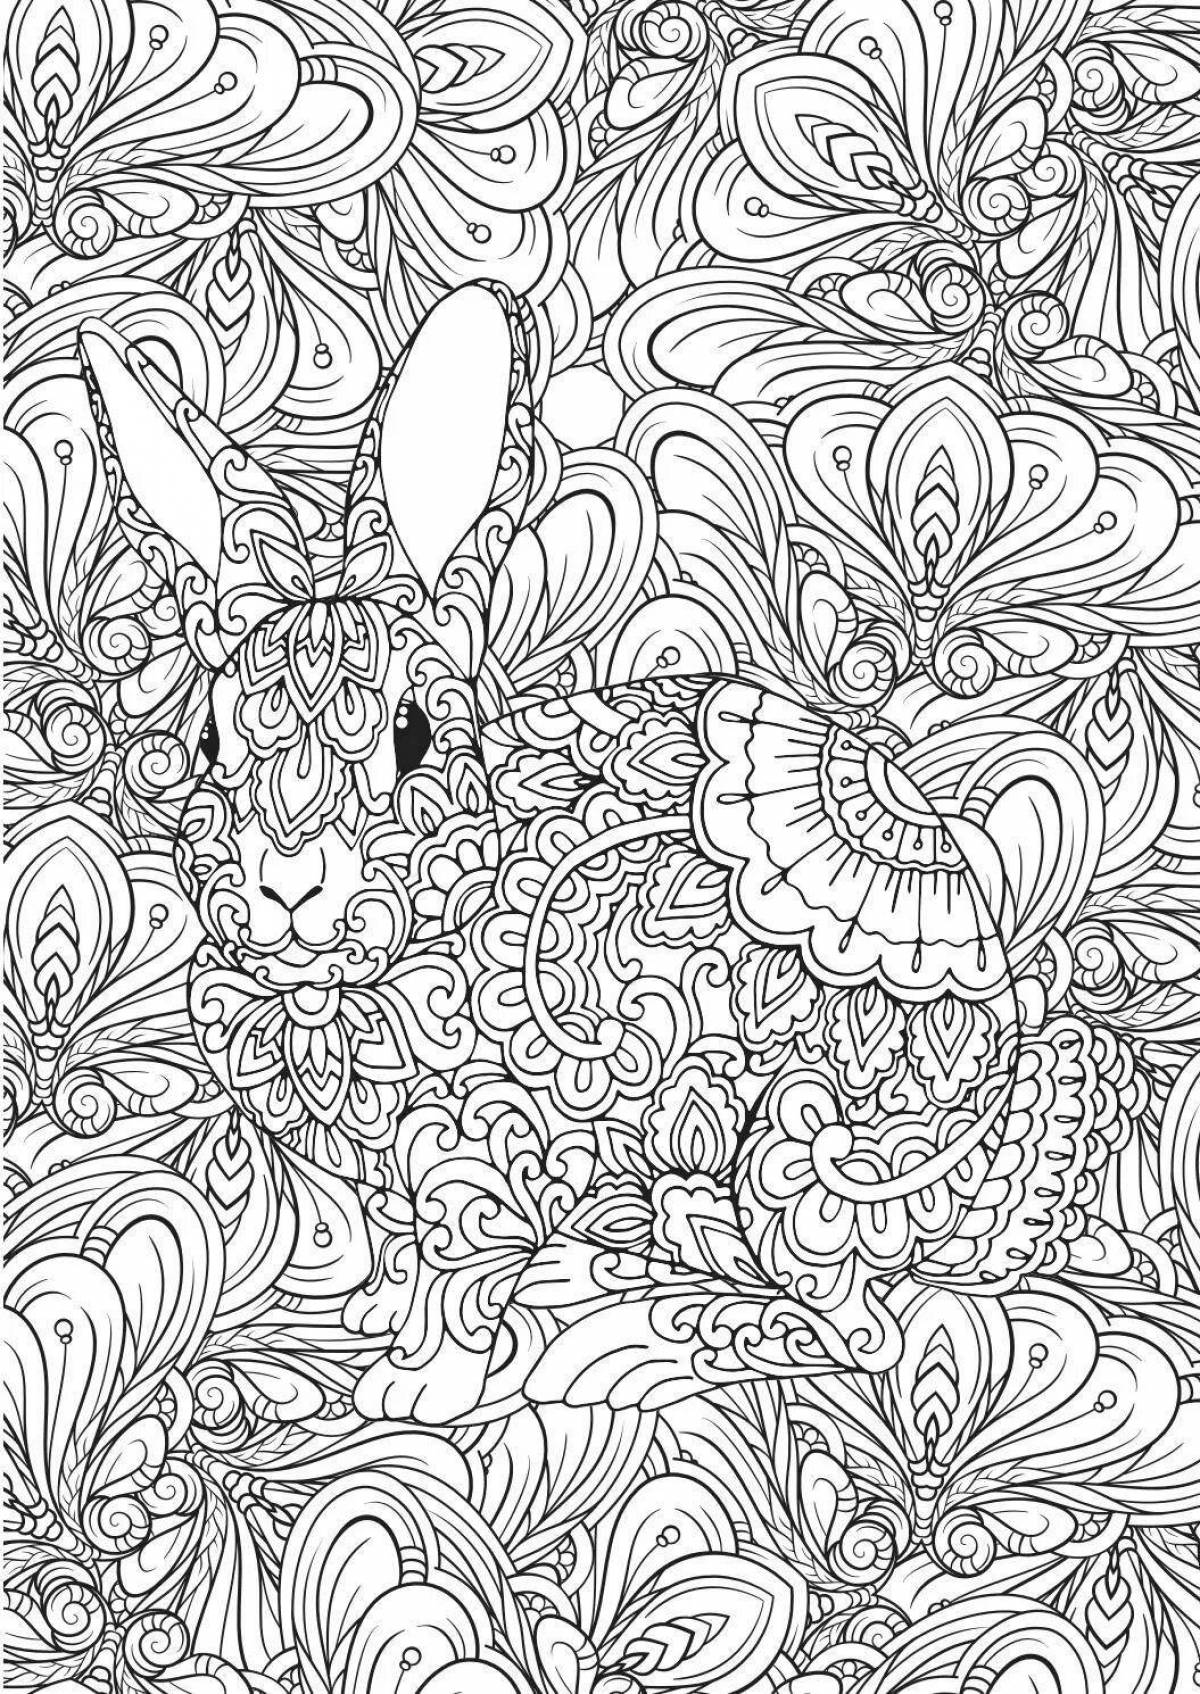 Coloring book for high school students